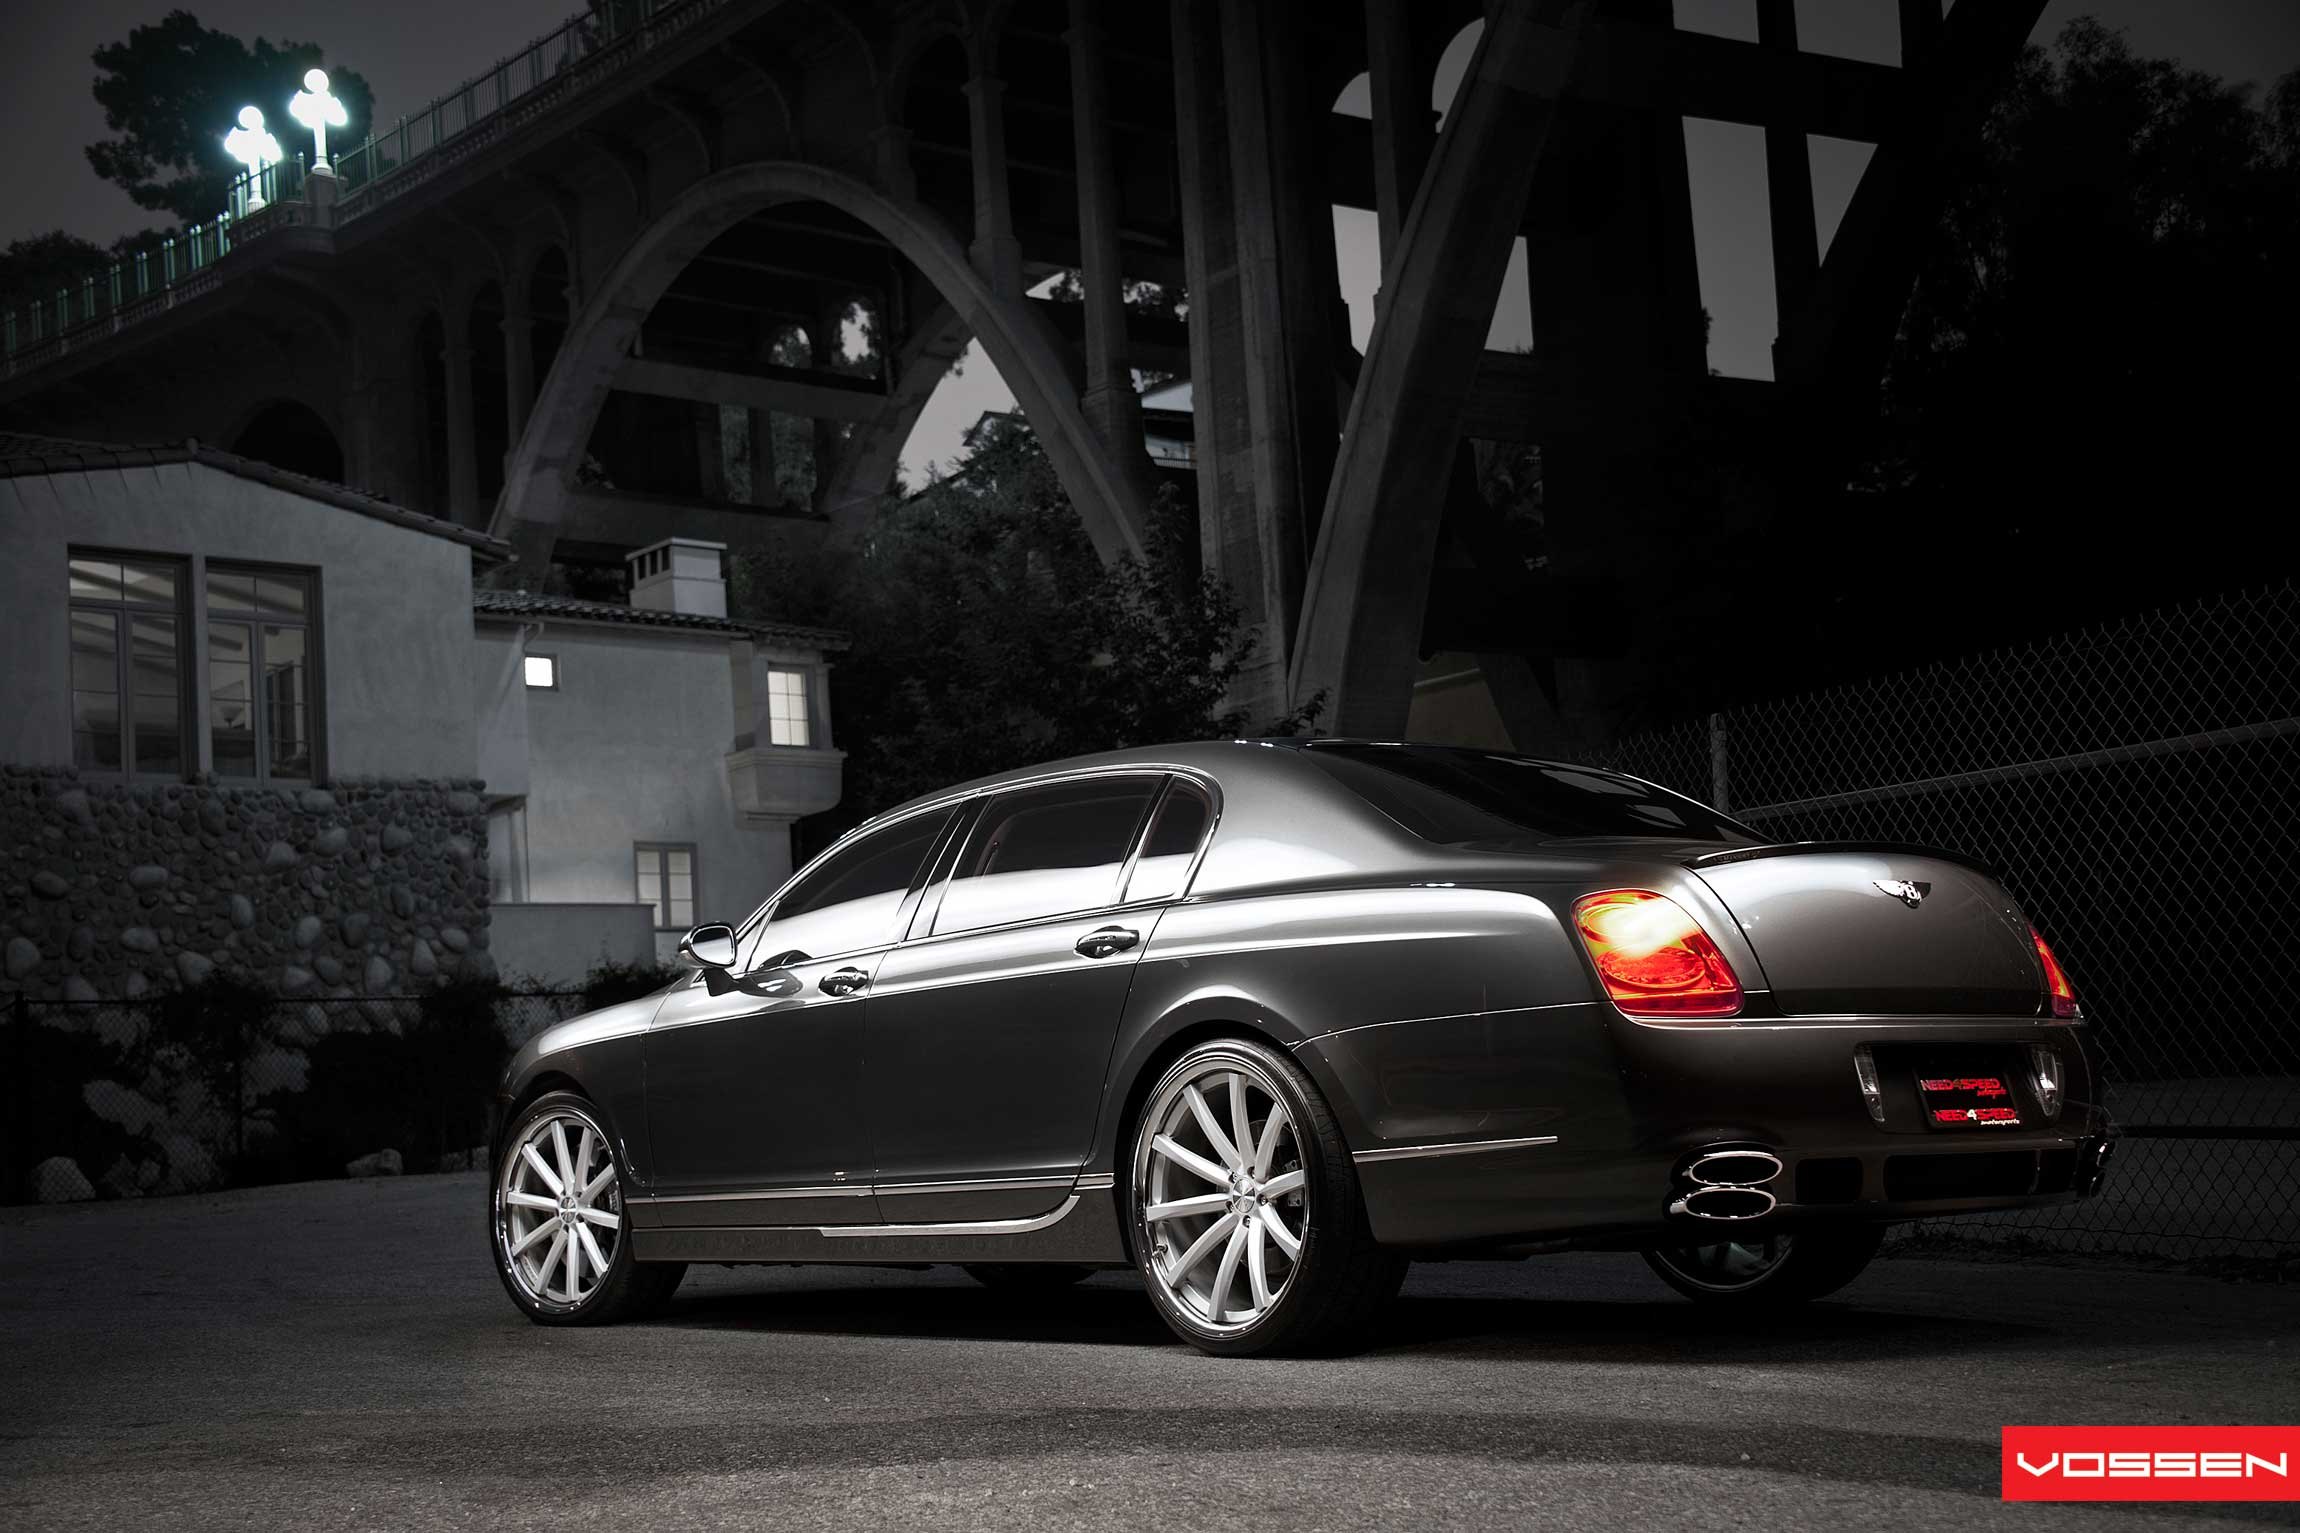 Aftermarket Side Skirts on Silver Bentley Flying Spur - Photo by Vossen